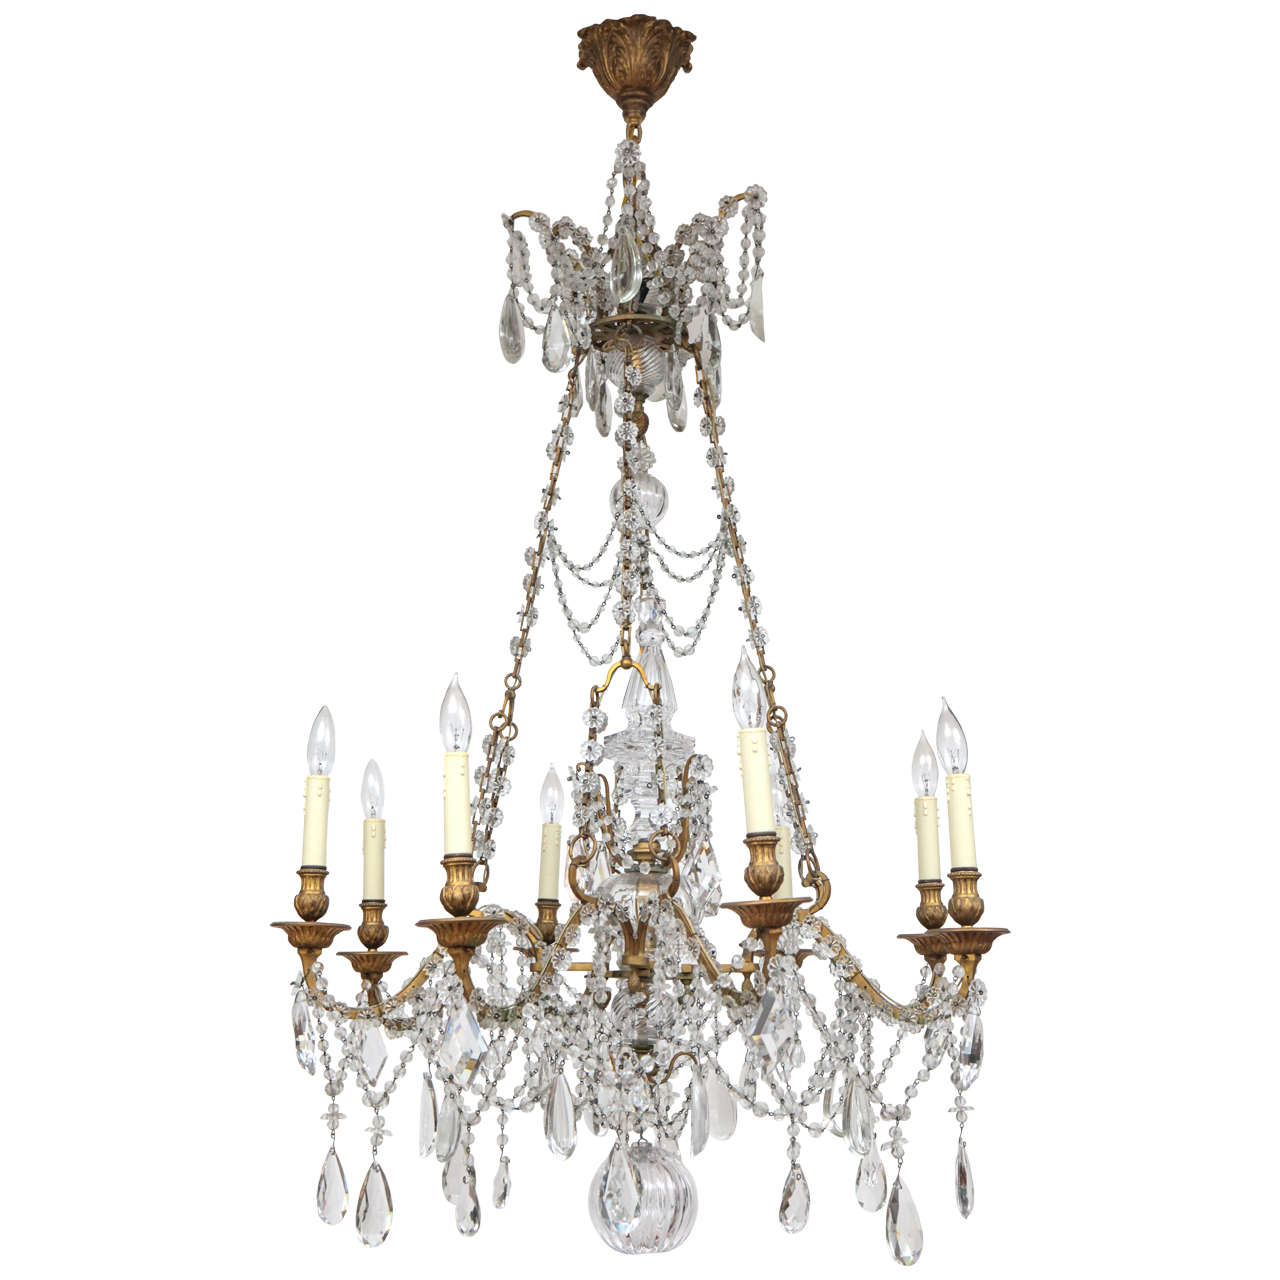 19th Century French Doré Bronze and Crystal Chandelier For Sale